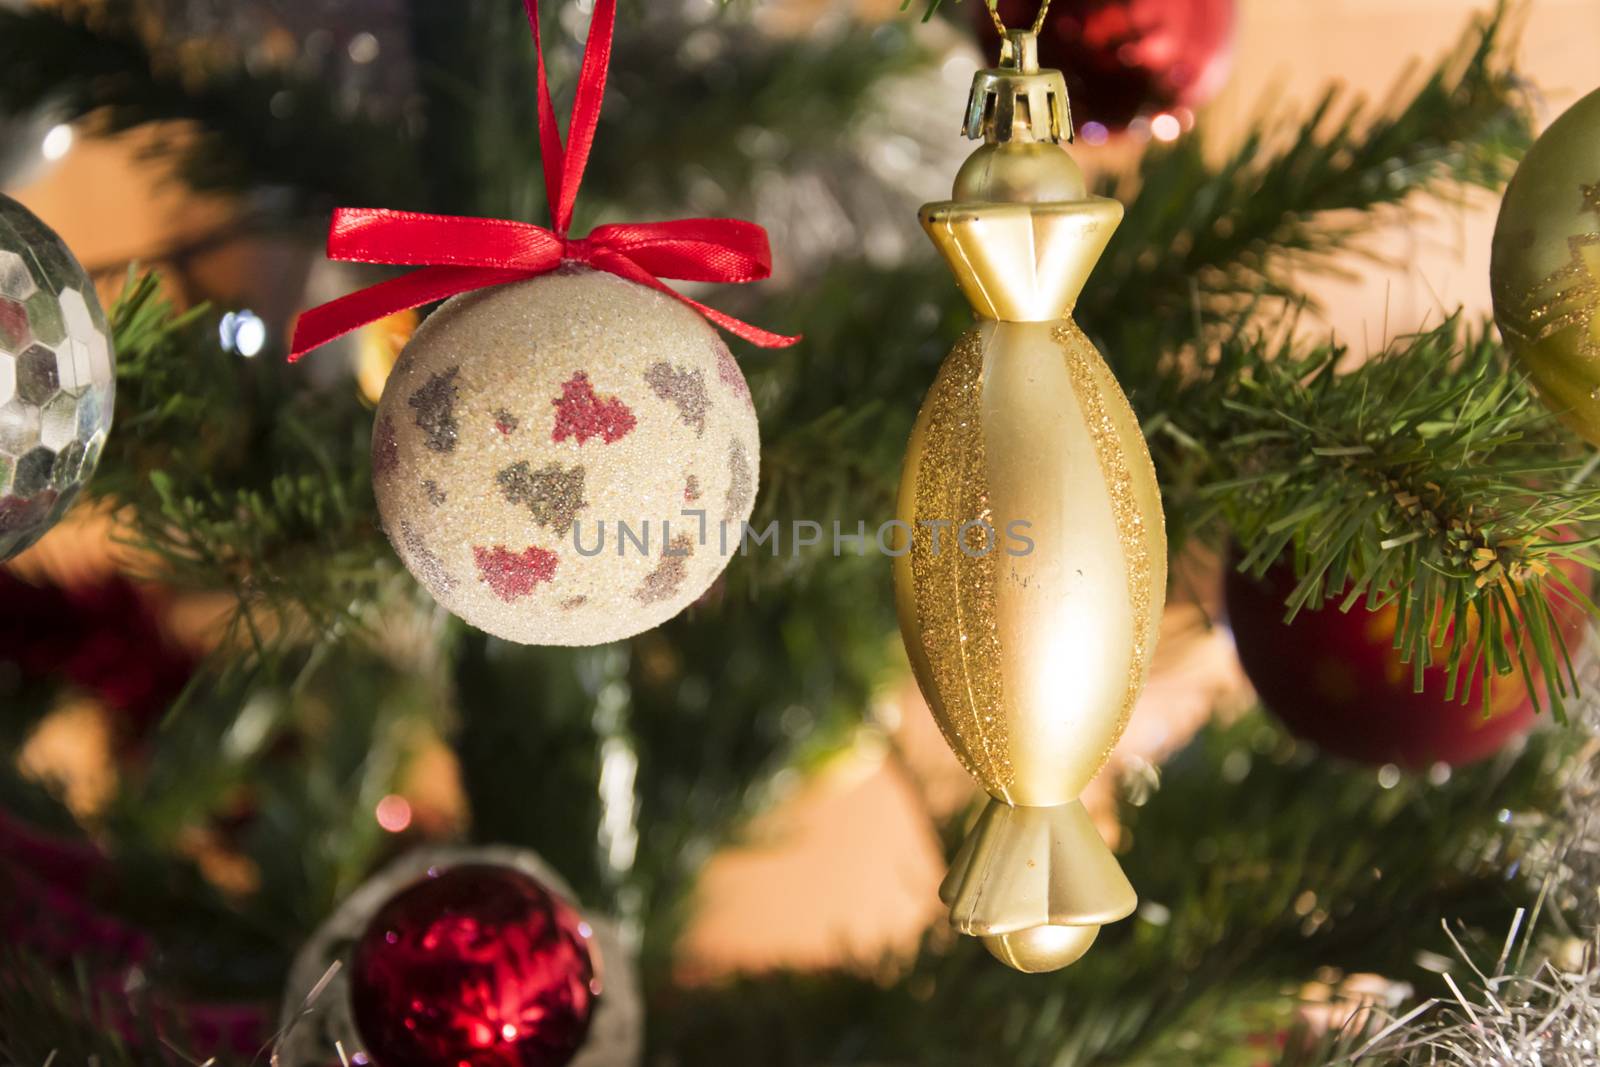 Golden Christmas ornament hanging on Christmas tree. Colorful backgorund. Chrismas and New Year decoration.